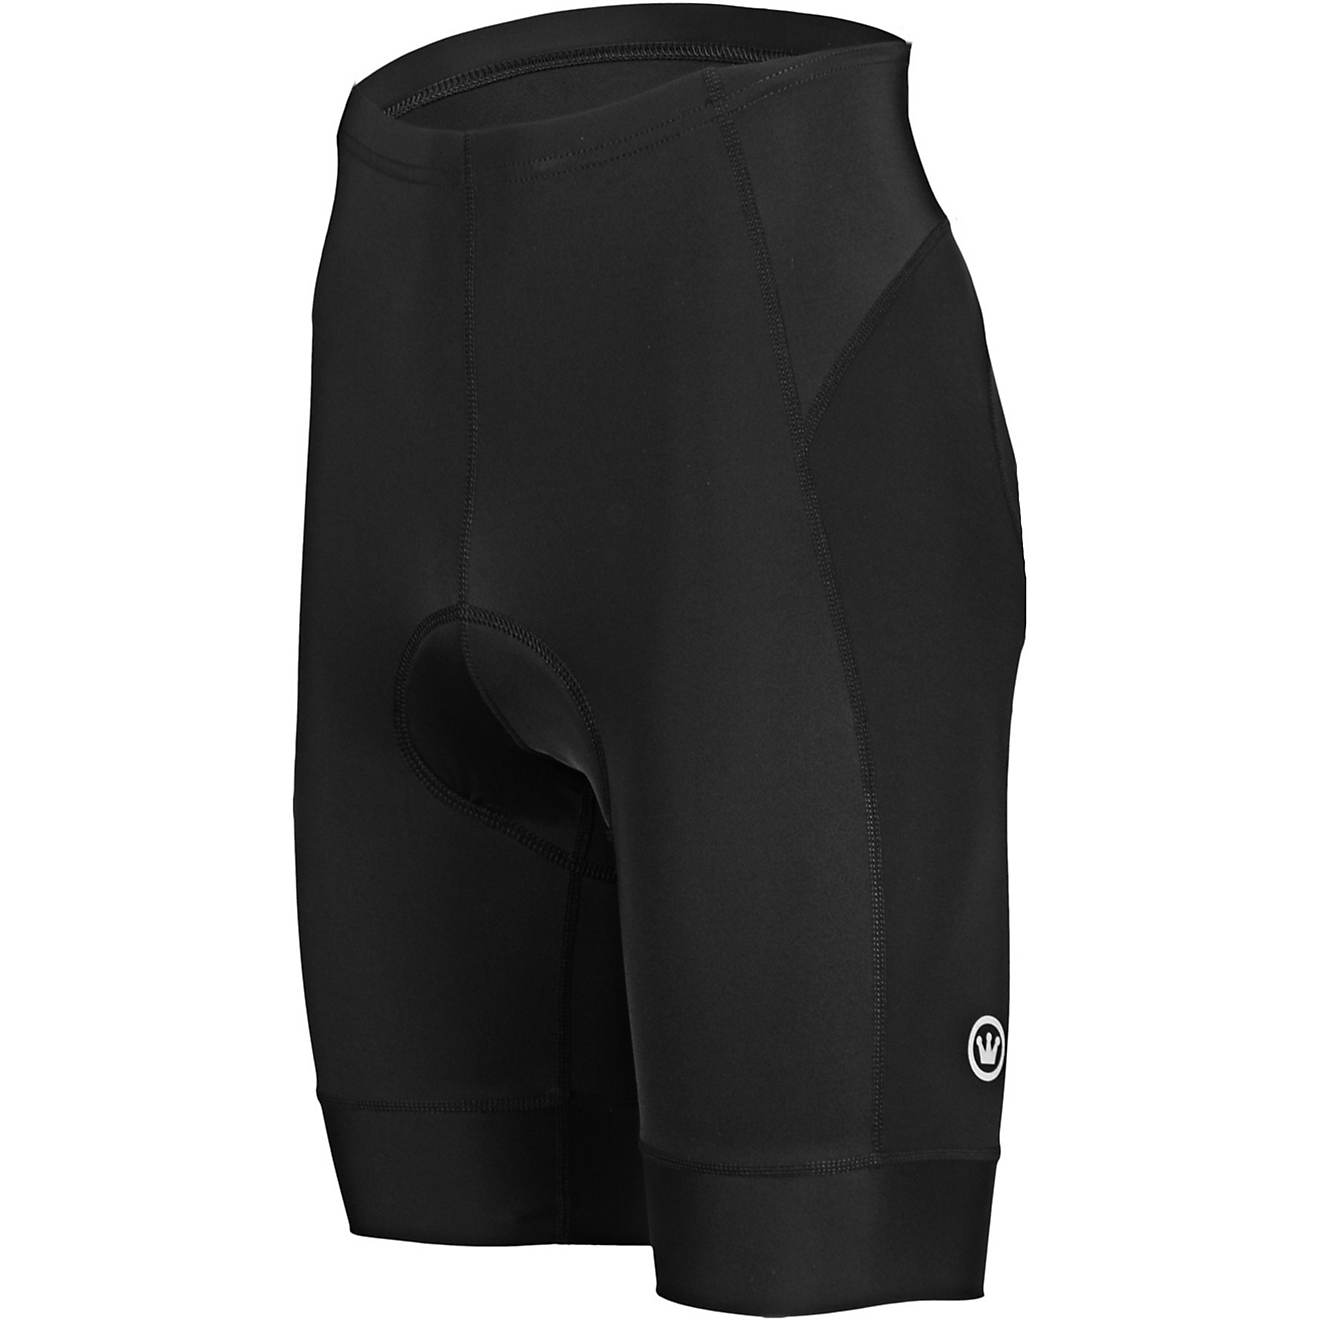 Mens Padded Cycling Shorts Compression Running Fitness Sports Boxers Tight Pants 